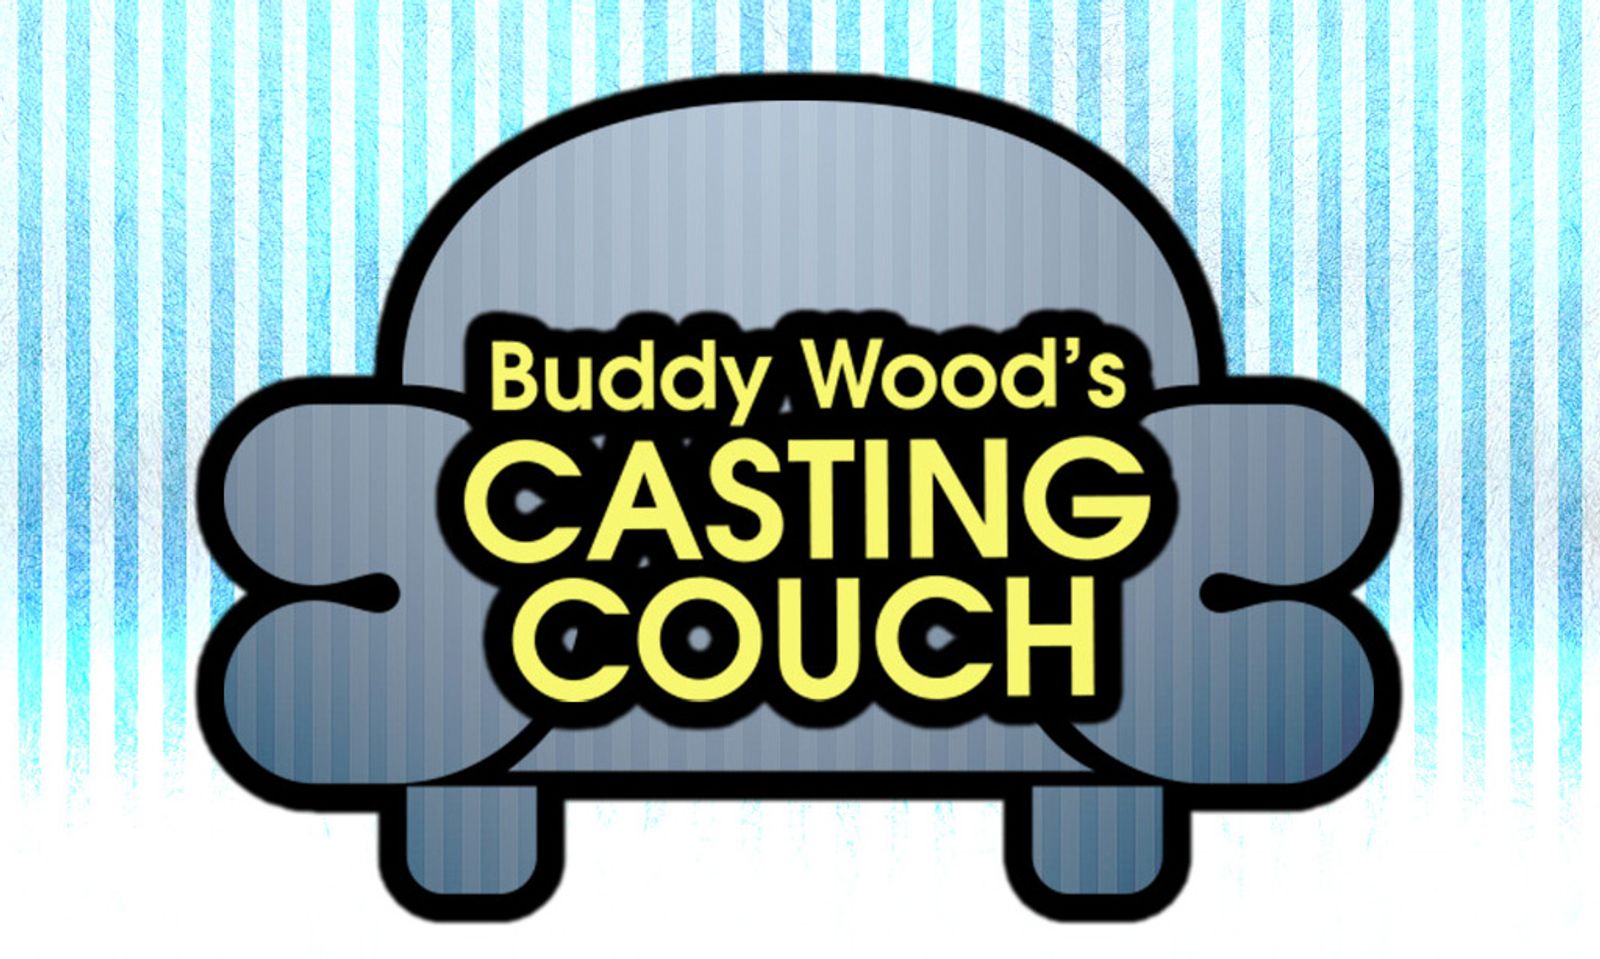 ‘Buddy Wood’s Casting Couch’ Out From Grooby